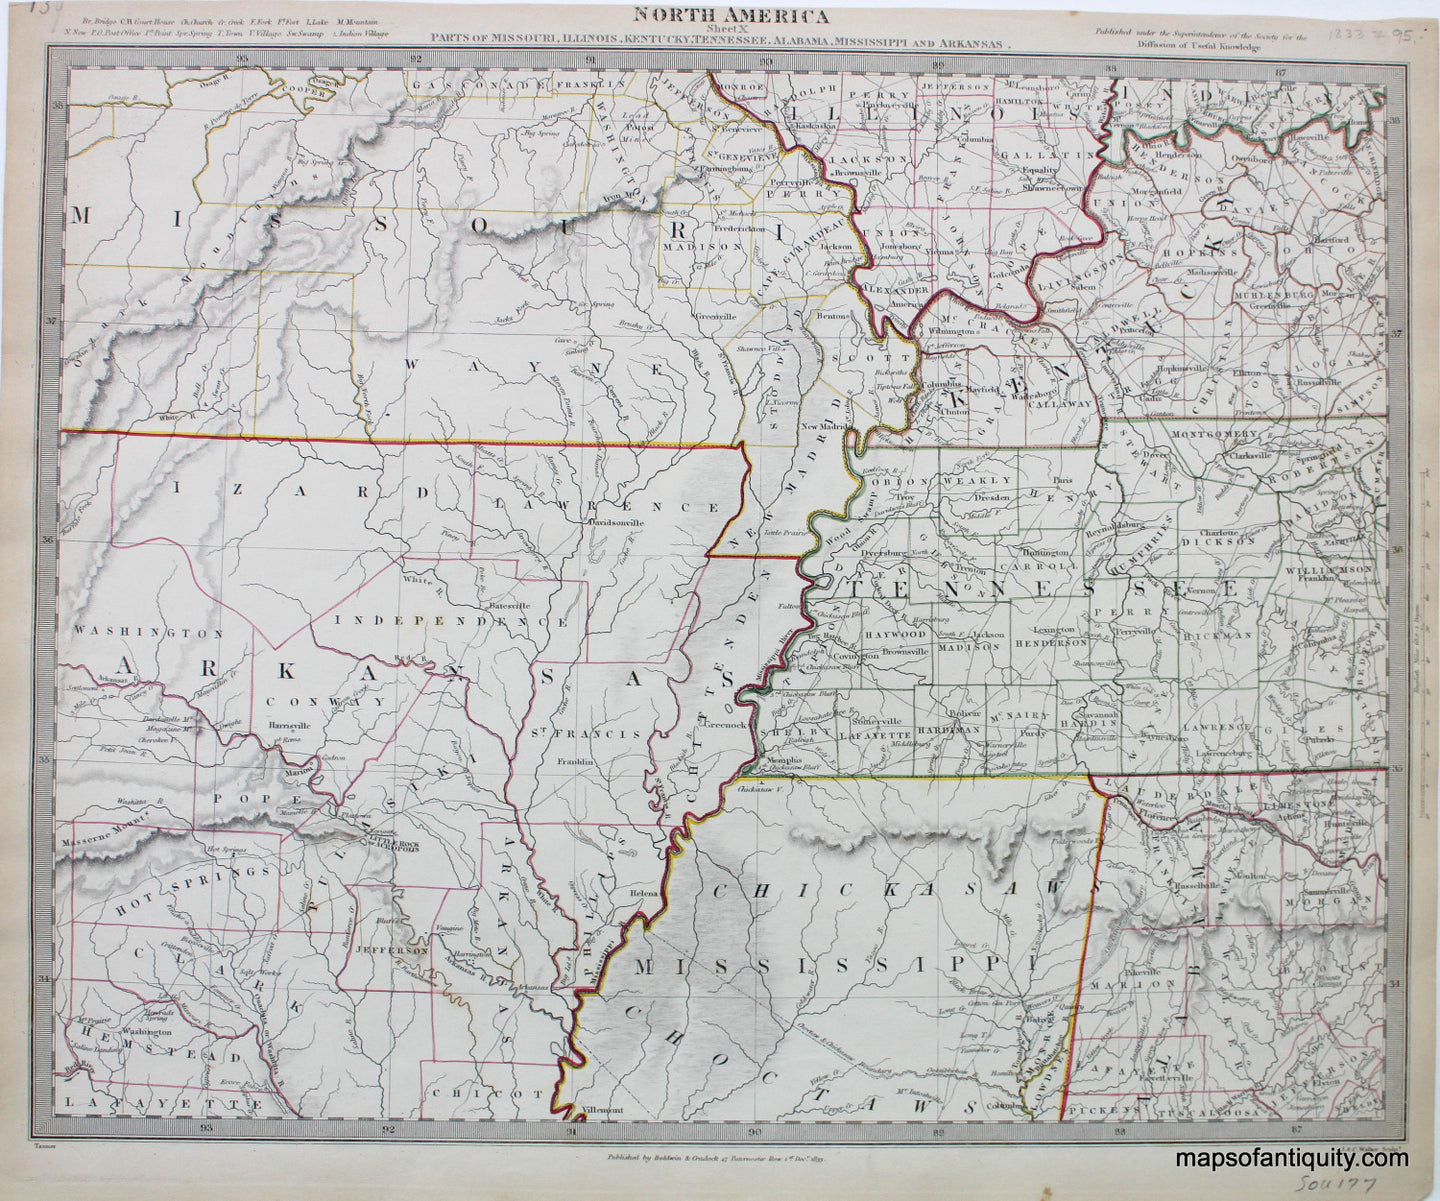 Antique-Map-with-Hand-Colored-Outline-Color-North-America-Sheet-X-Parts-of-Missouri-Illinois-Kentucky-Tennessee-Alabama-Mississippi-and-Arkansas.---United-States-South-General-1833-S.D.U.K./Society-for-the-Diffusion-of-Useful-Knowledge-Maps-Of-Antiquity